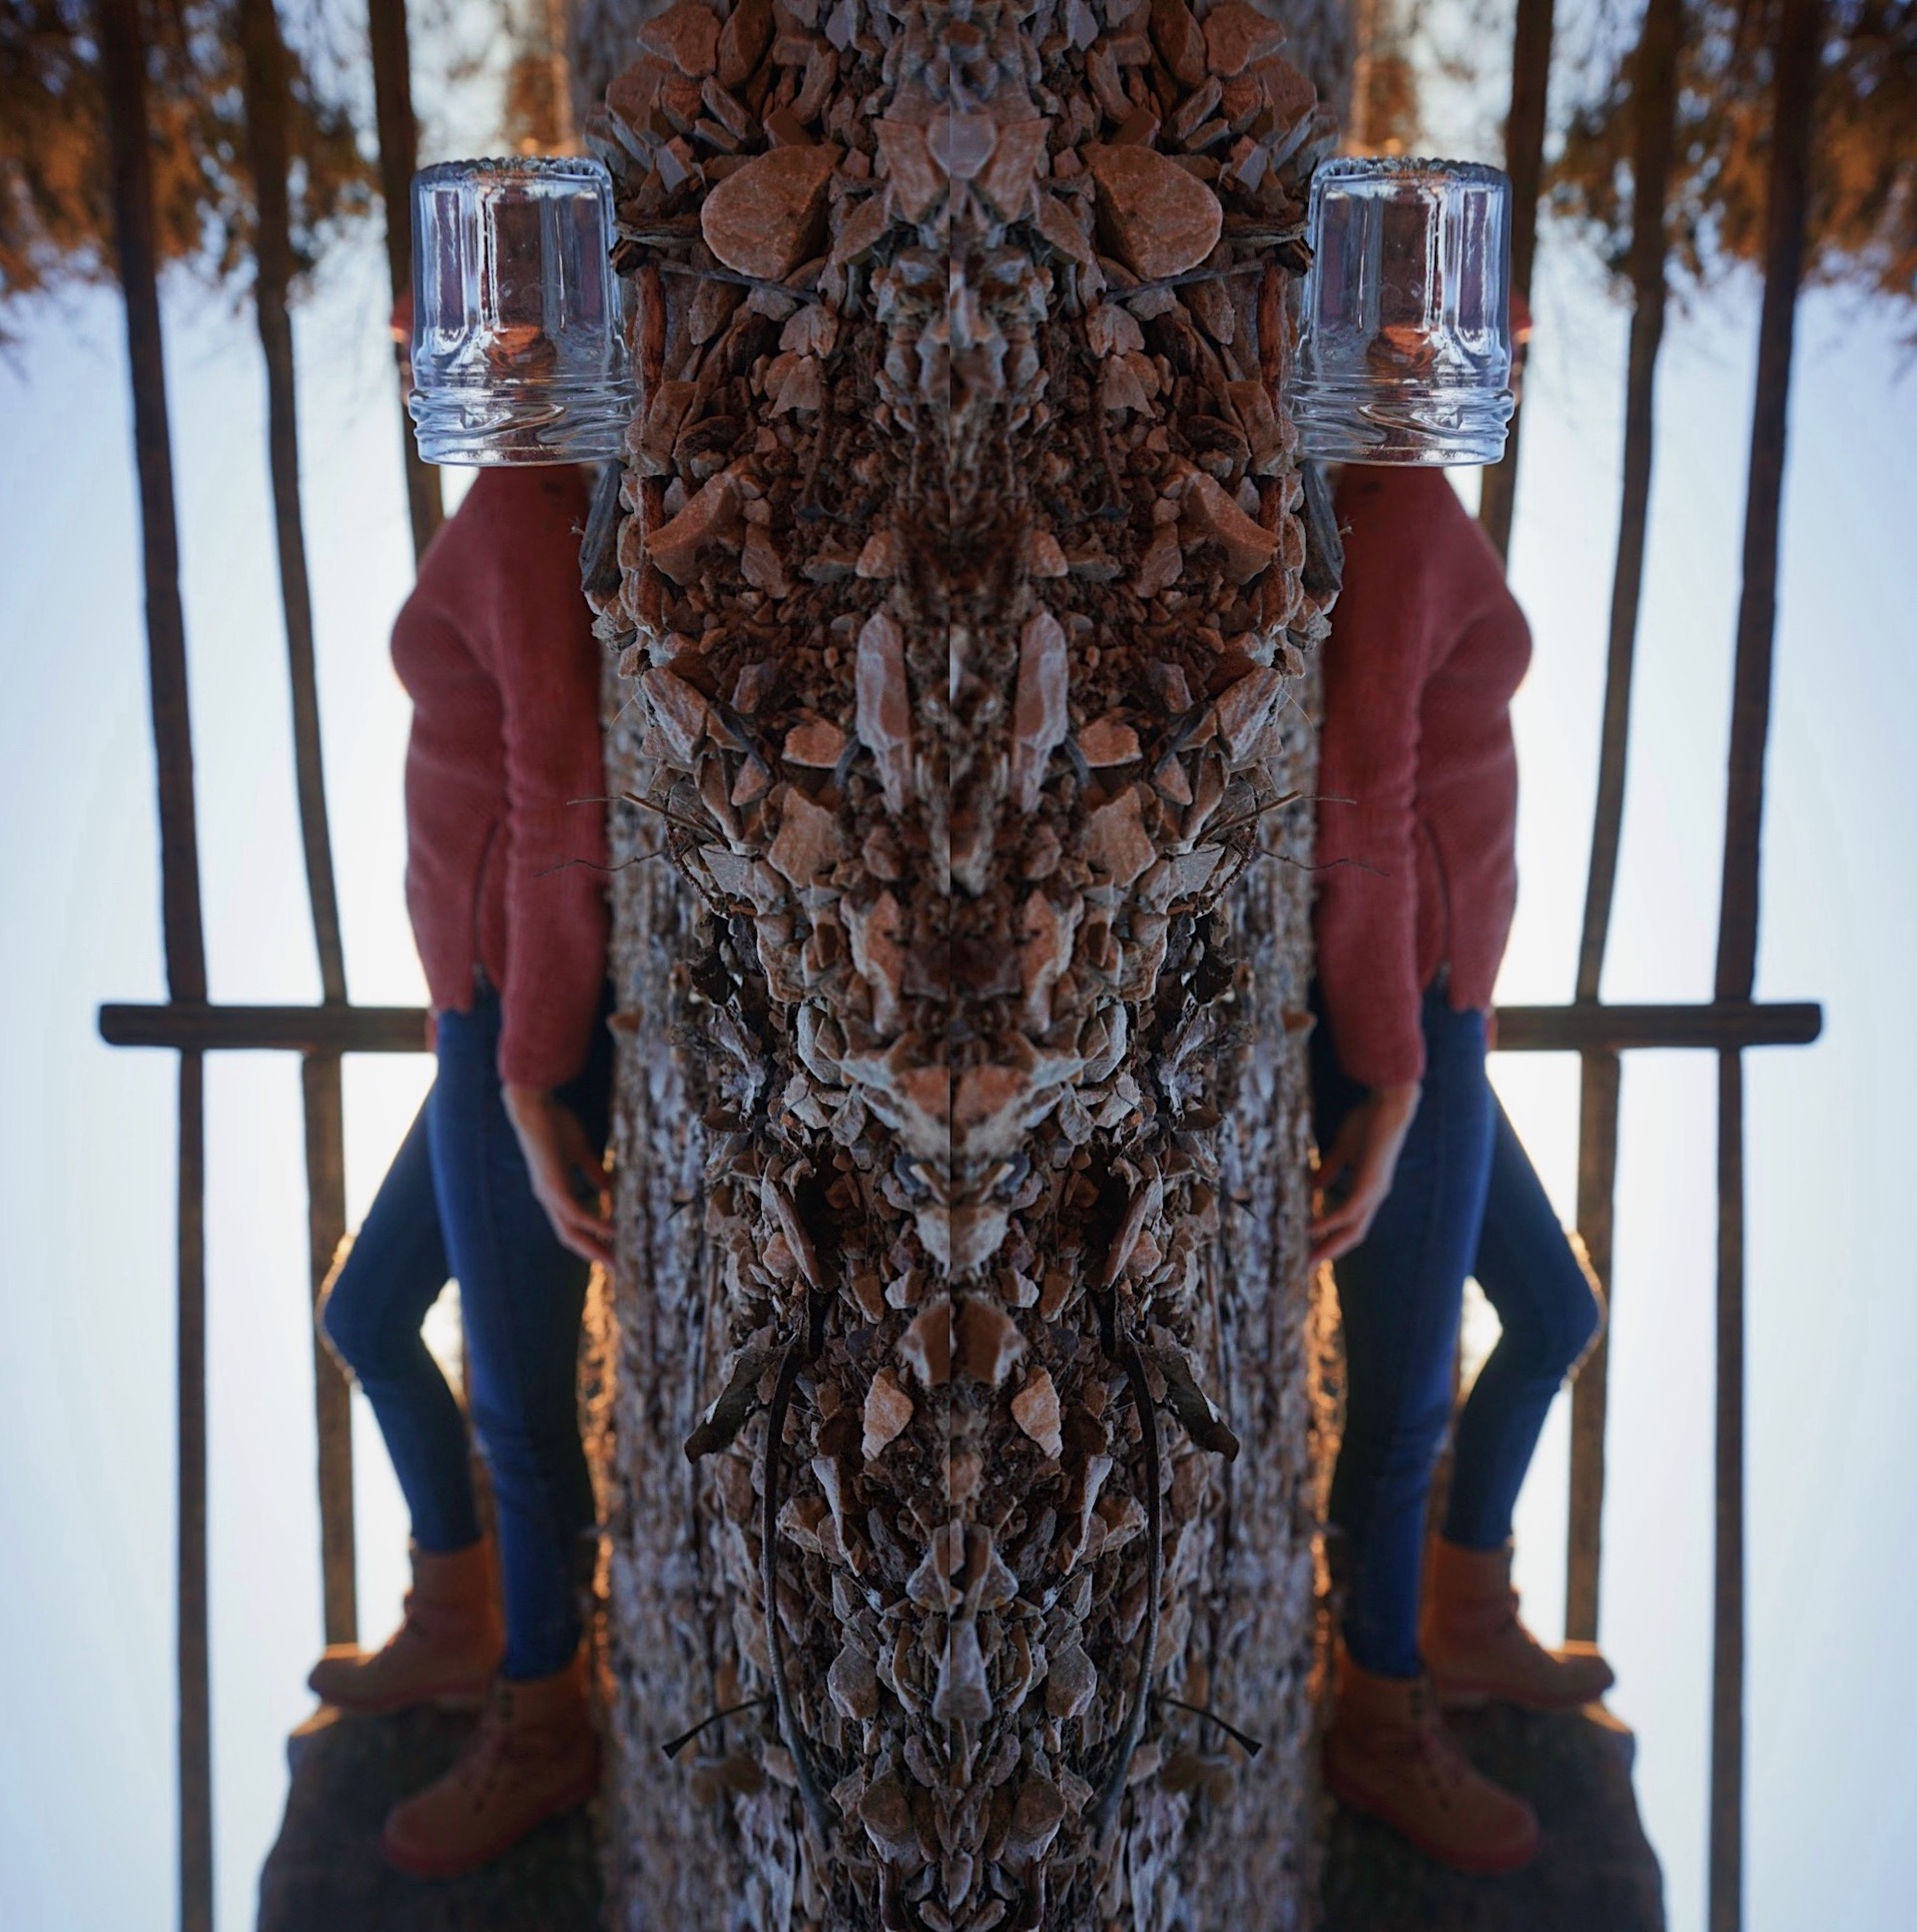 Split view of a tree with a person's figure in profile on a snowy background